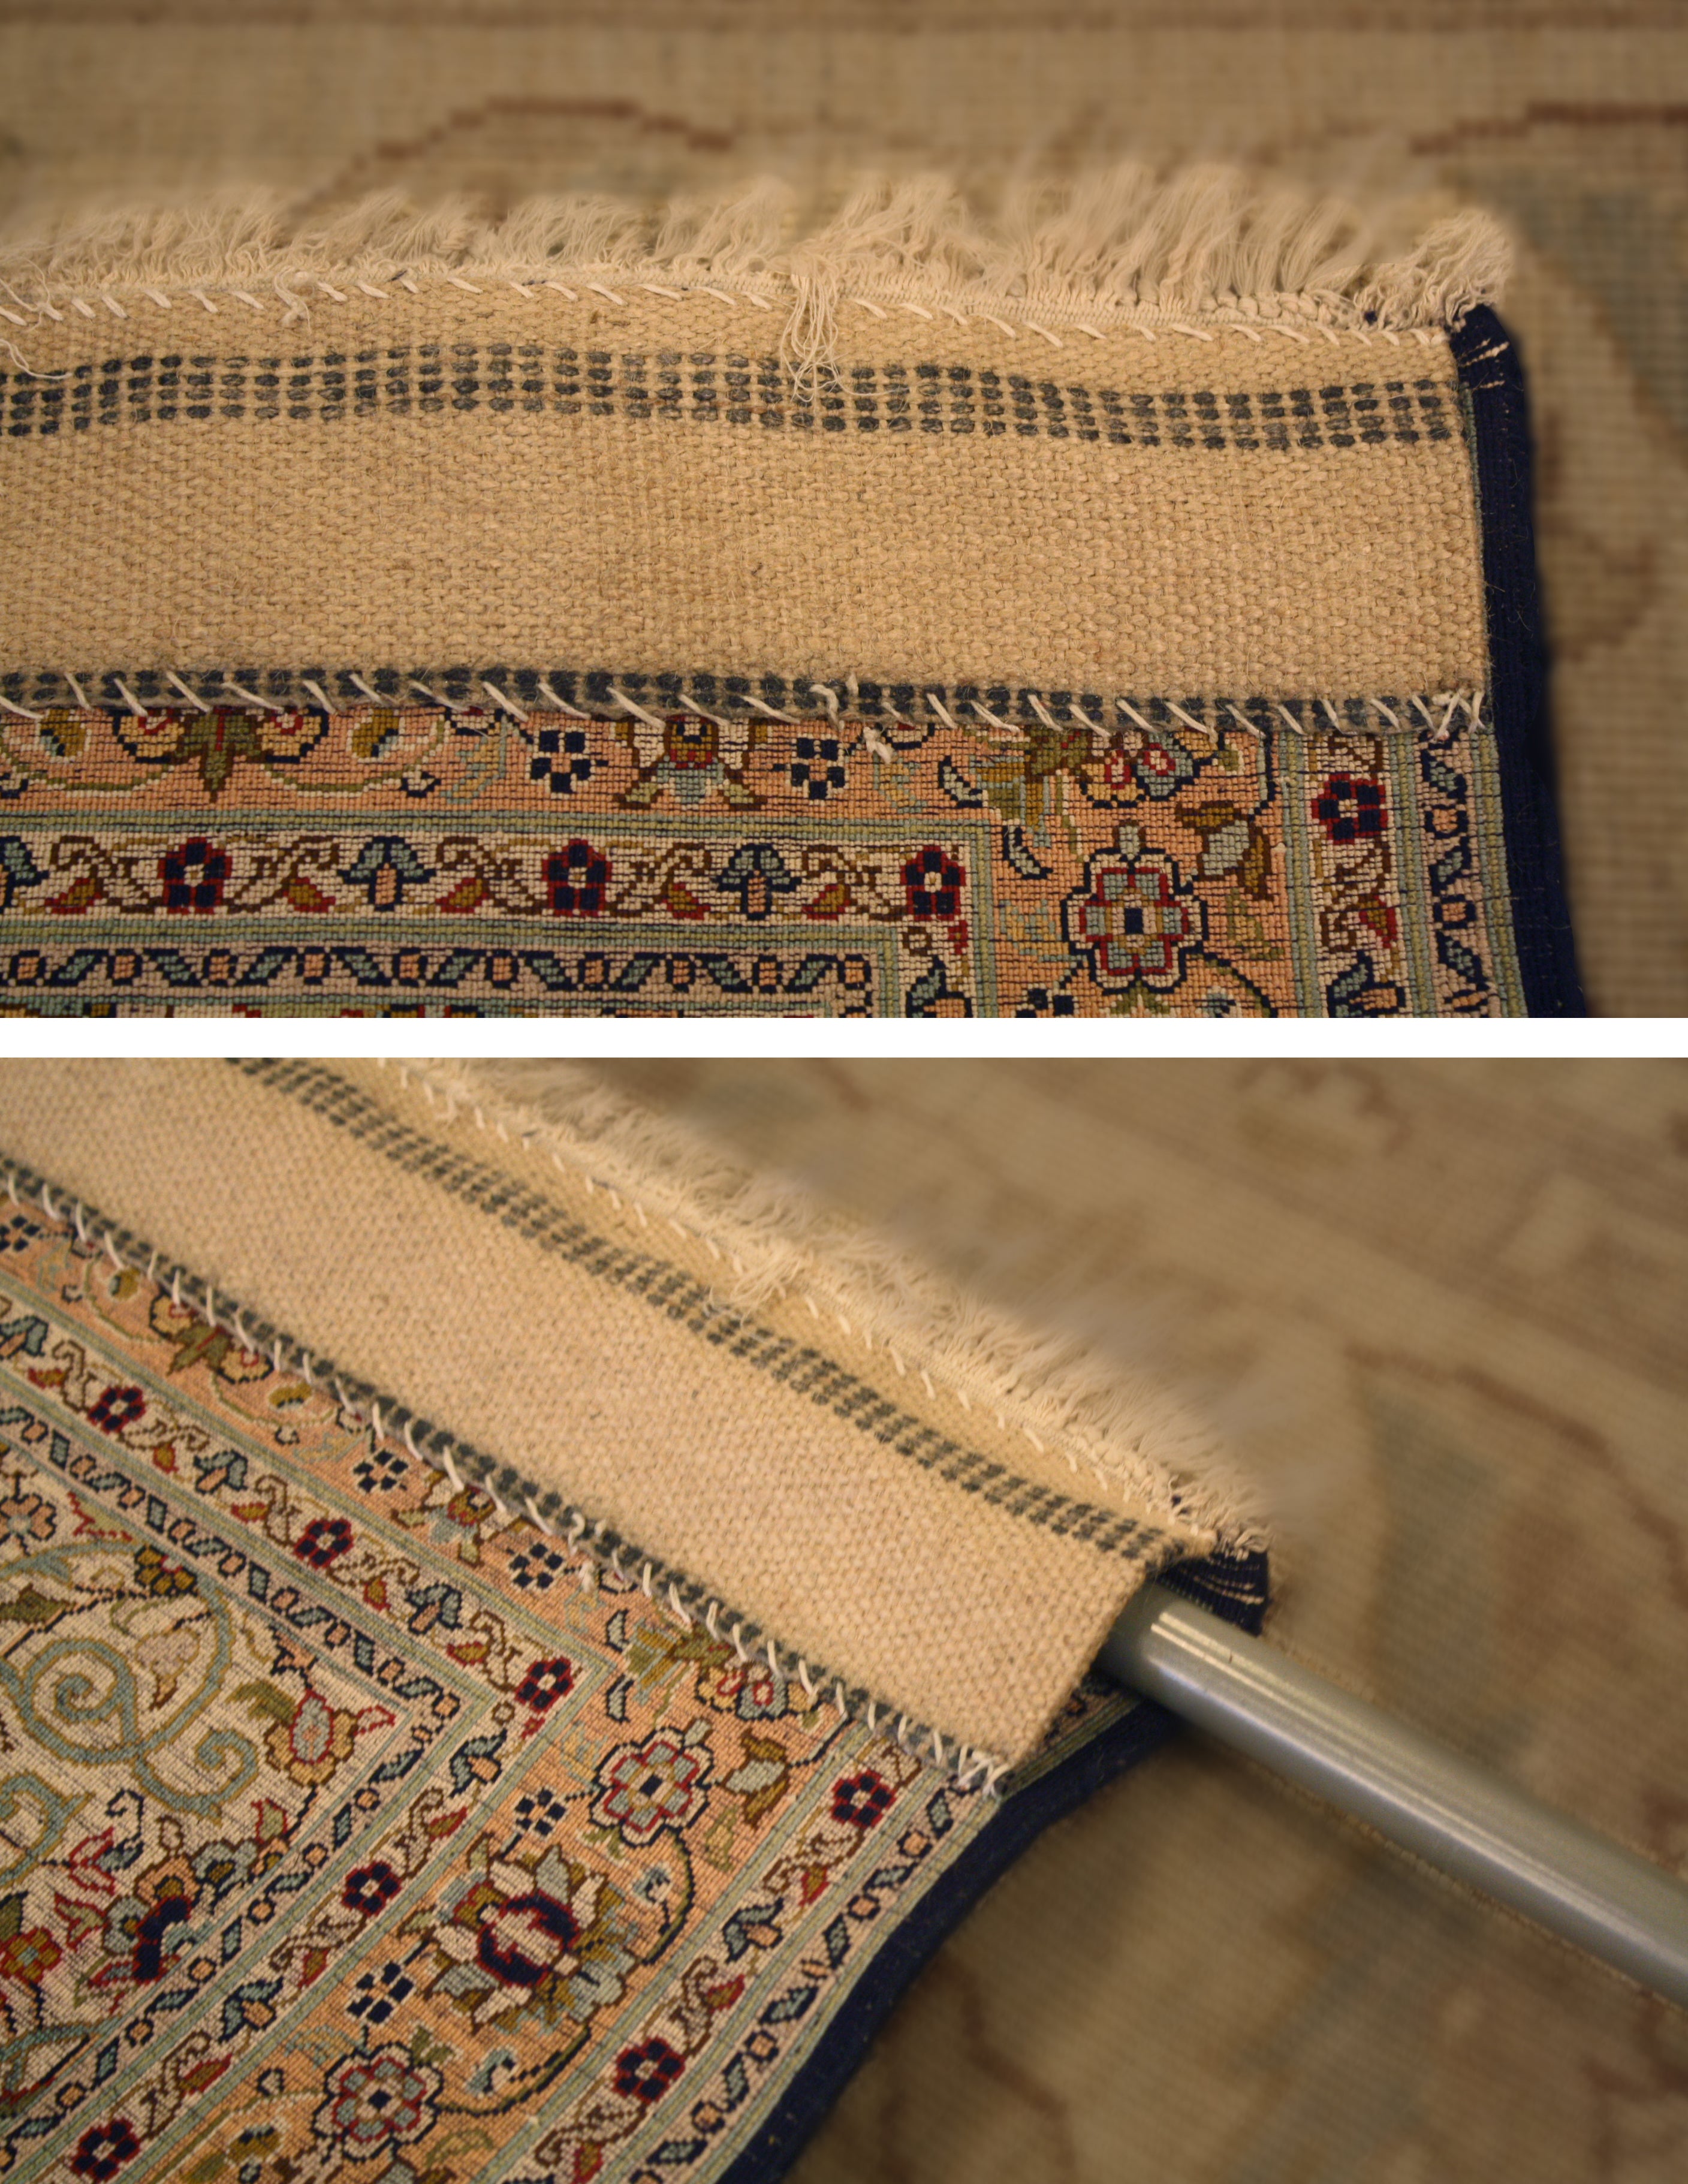 How to hang hooked rugs..